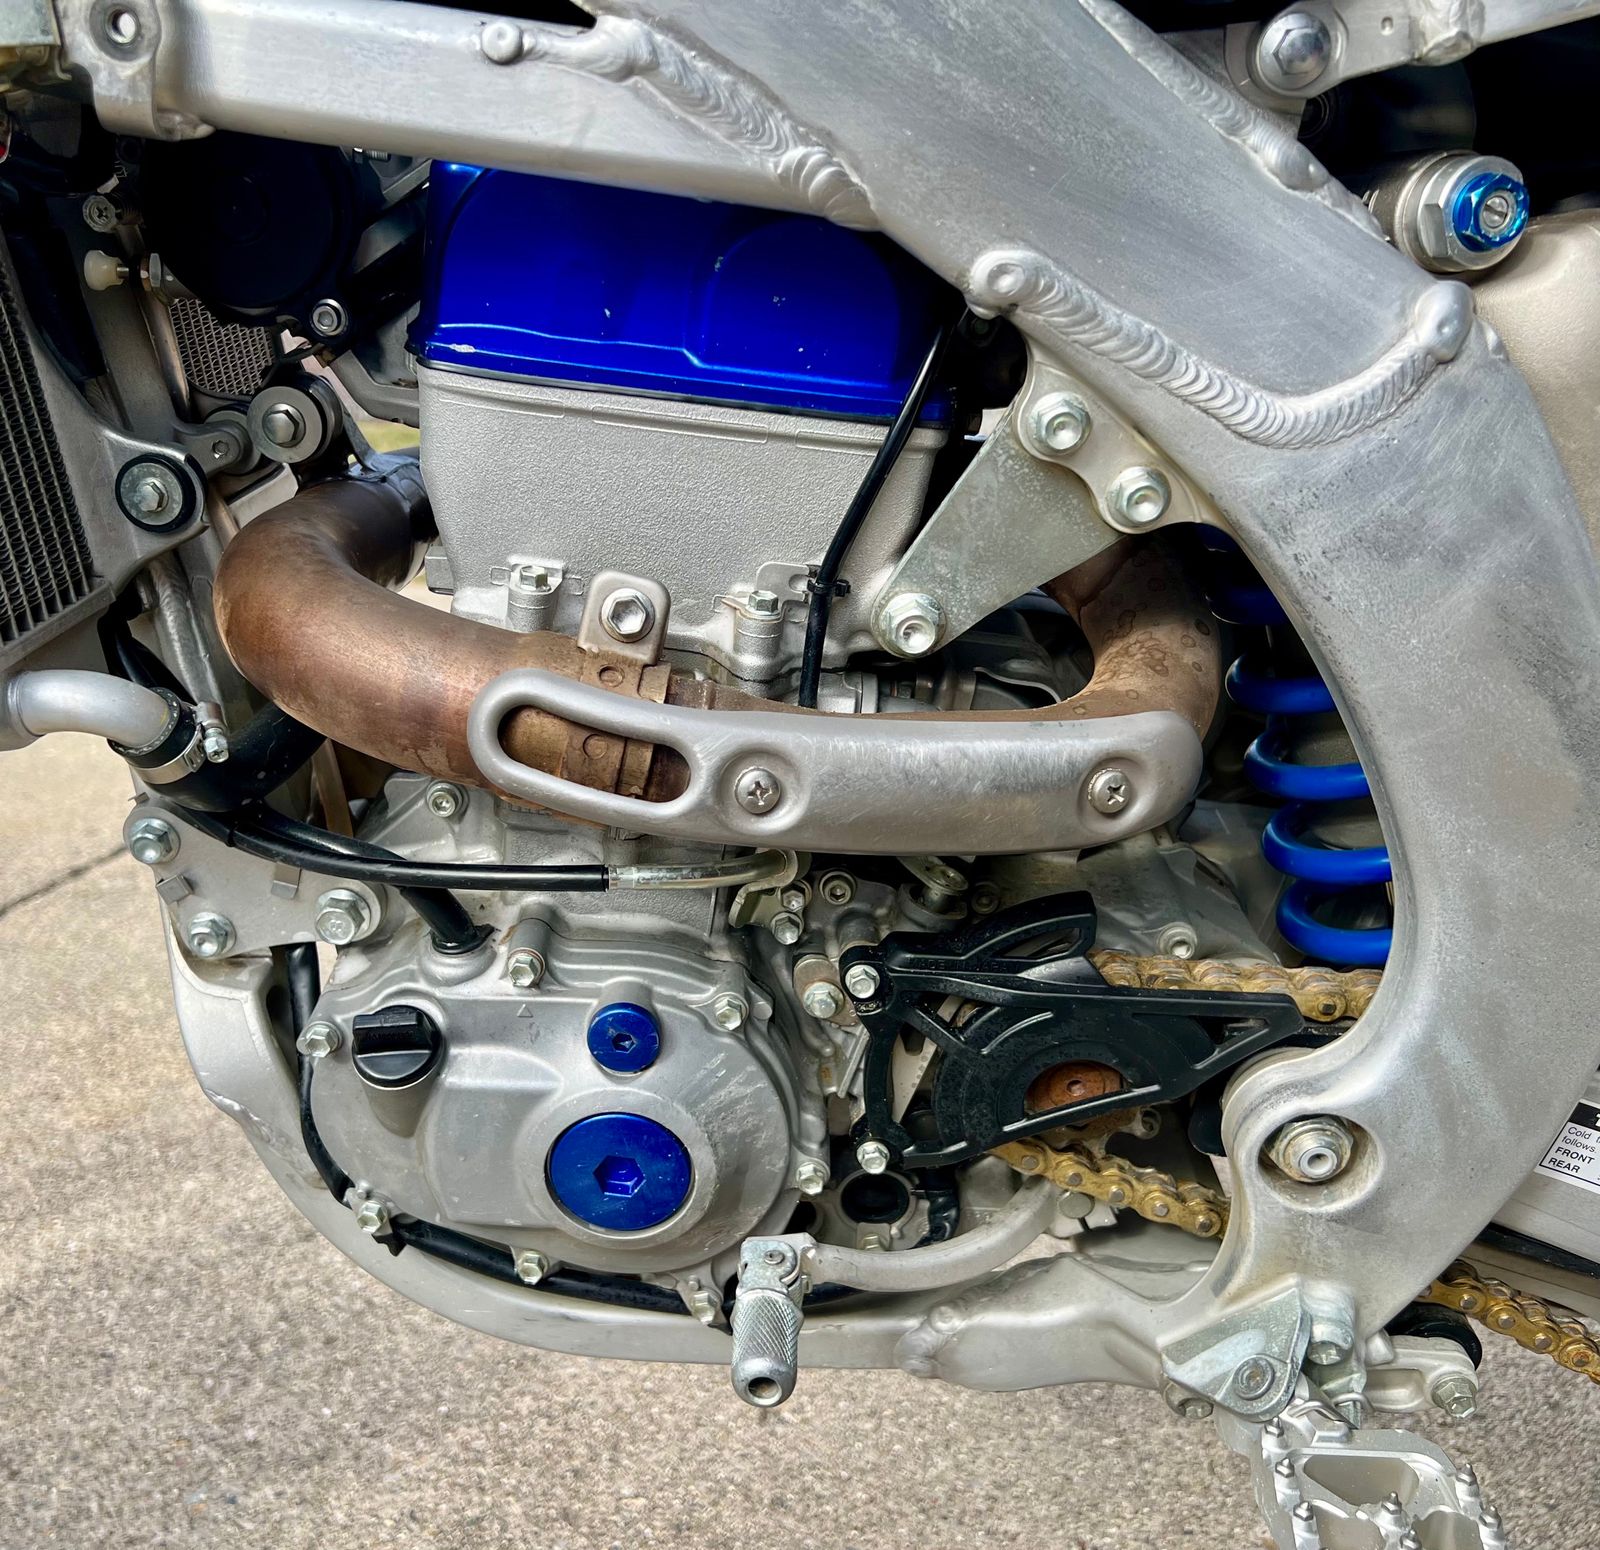 2020 YZ450f Complete Engine